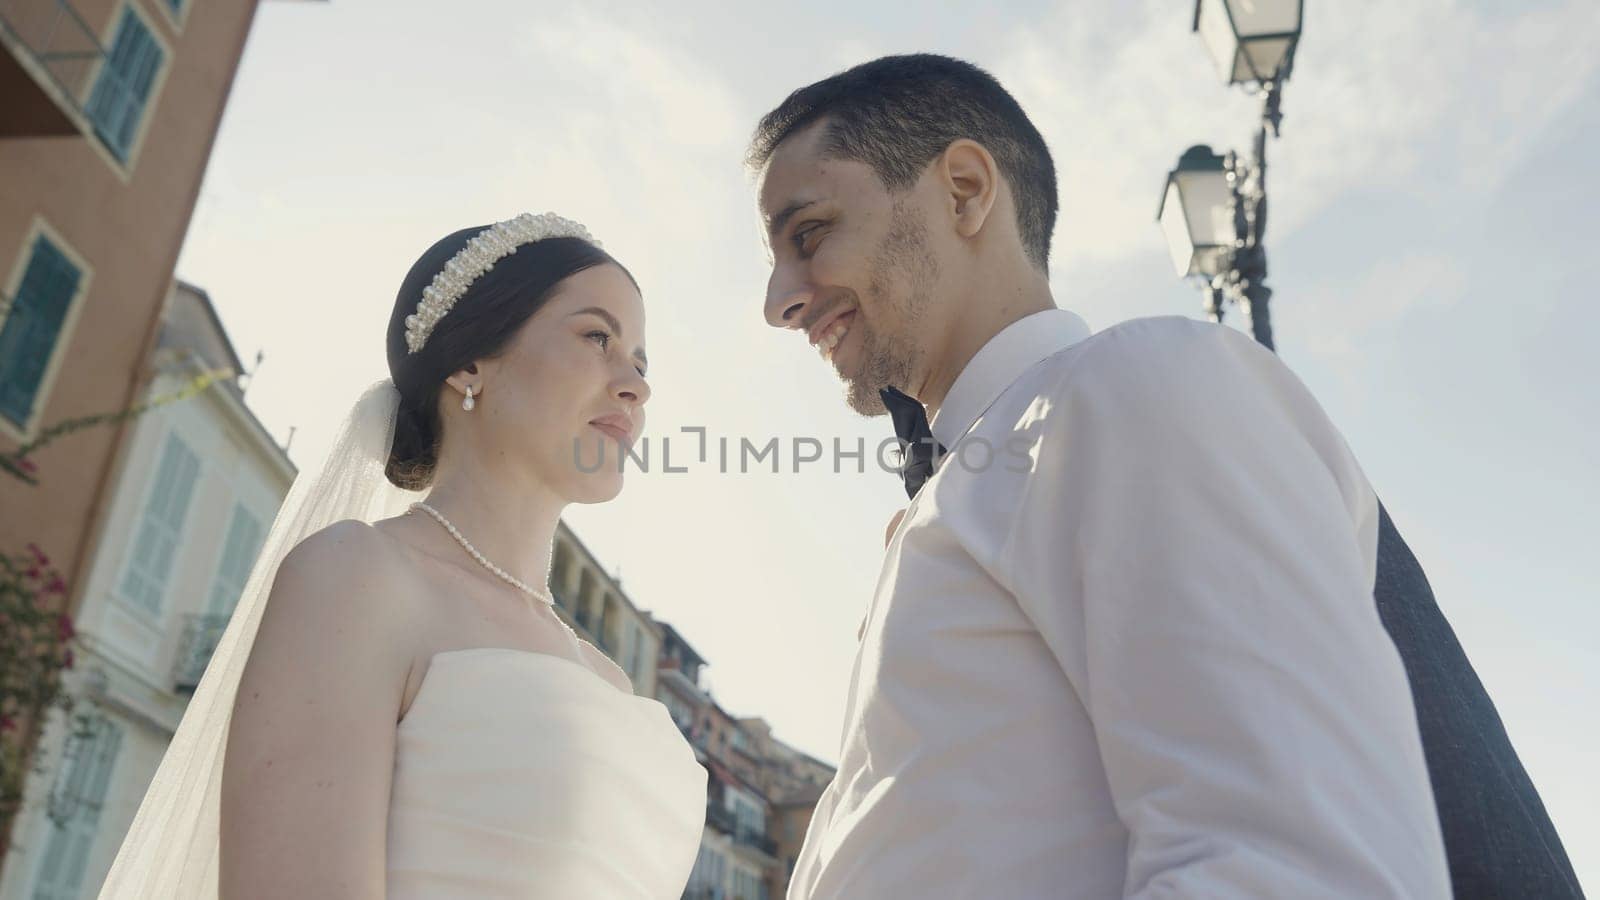 Bride and groom walking in a city street in summer day. Action. Low angle view of a woman with decoration on her hair and a veil standing near her groom in white shirt against the sun. by Mediawhalestock